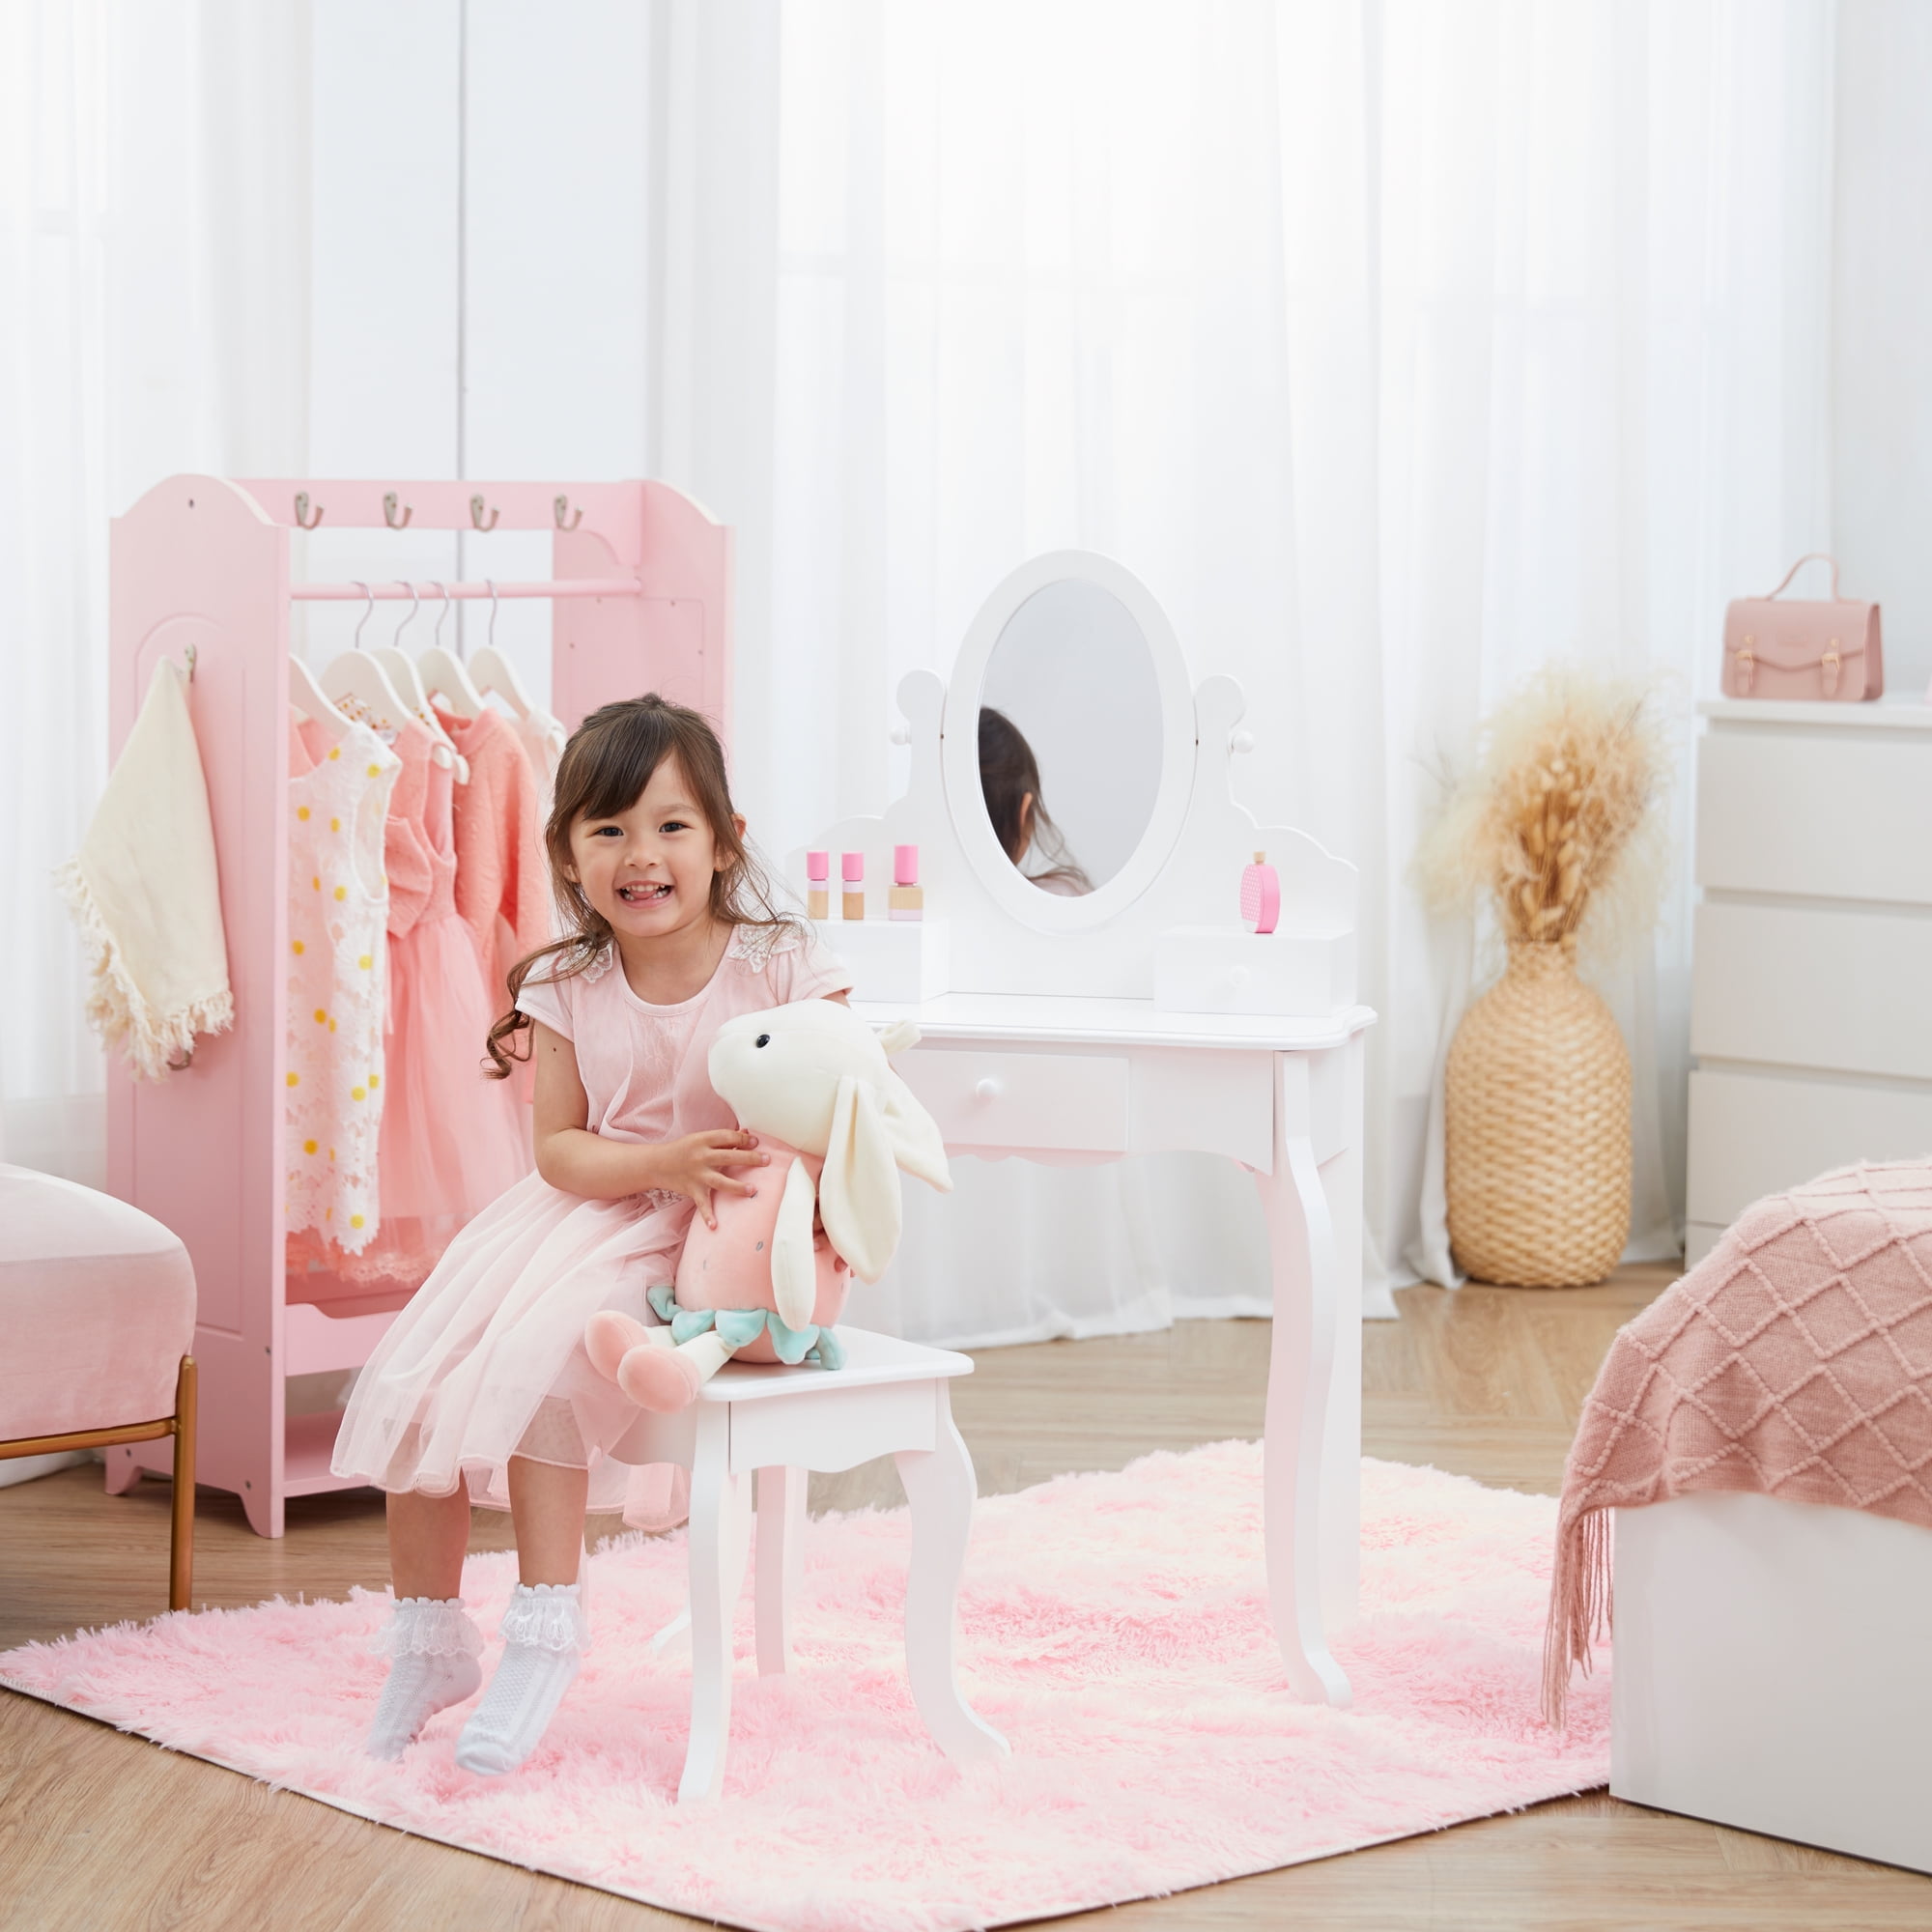 Fantasy Fields Little Princess Vanity Table Mirror, Drawers, and Stool, White - Walmart.com